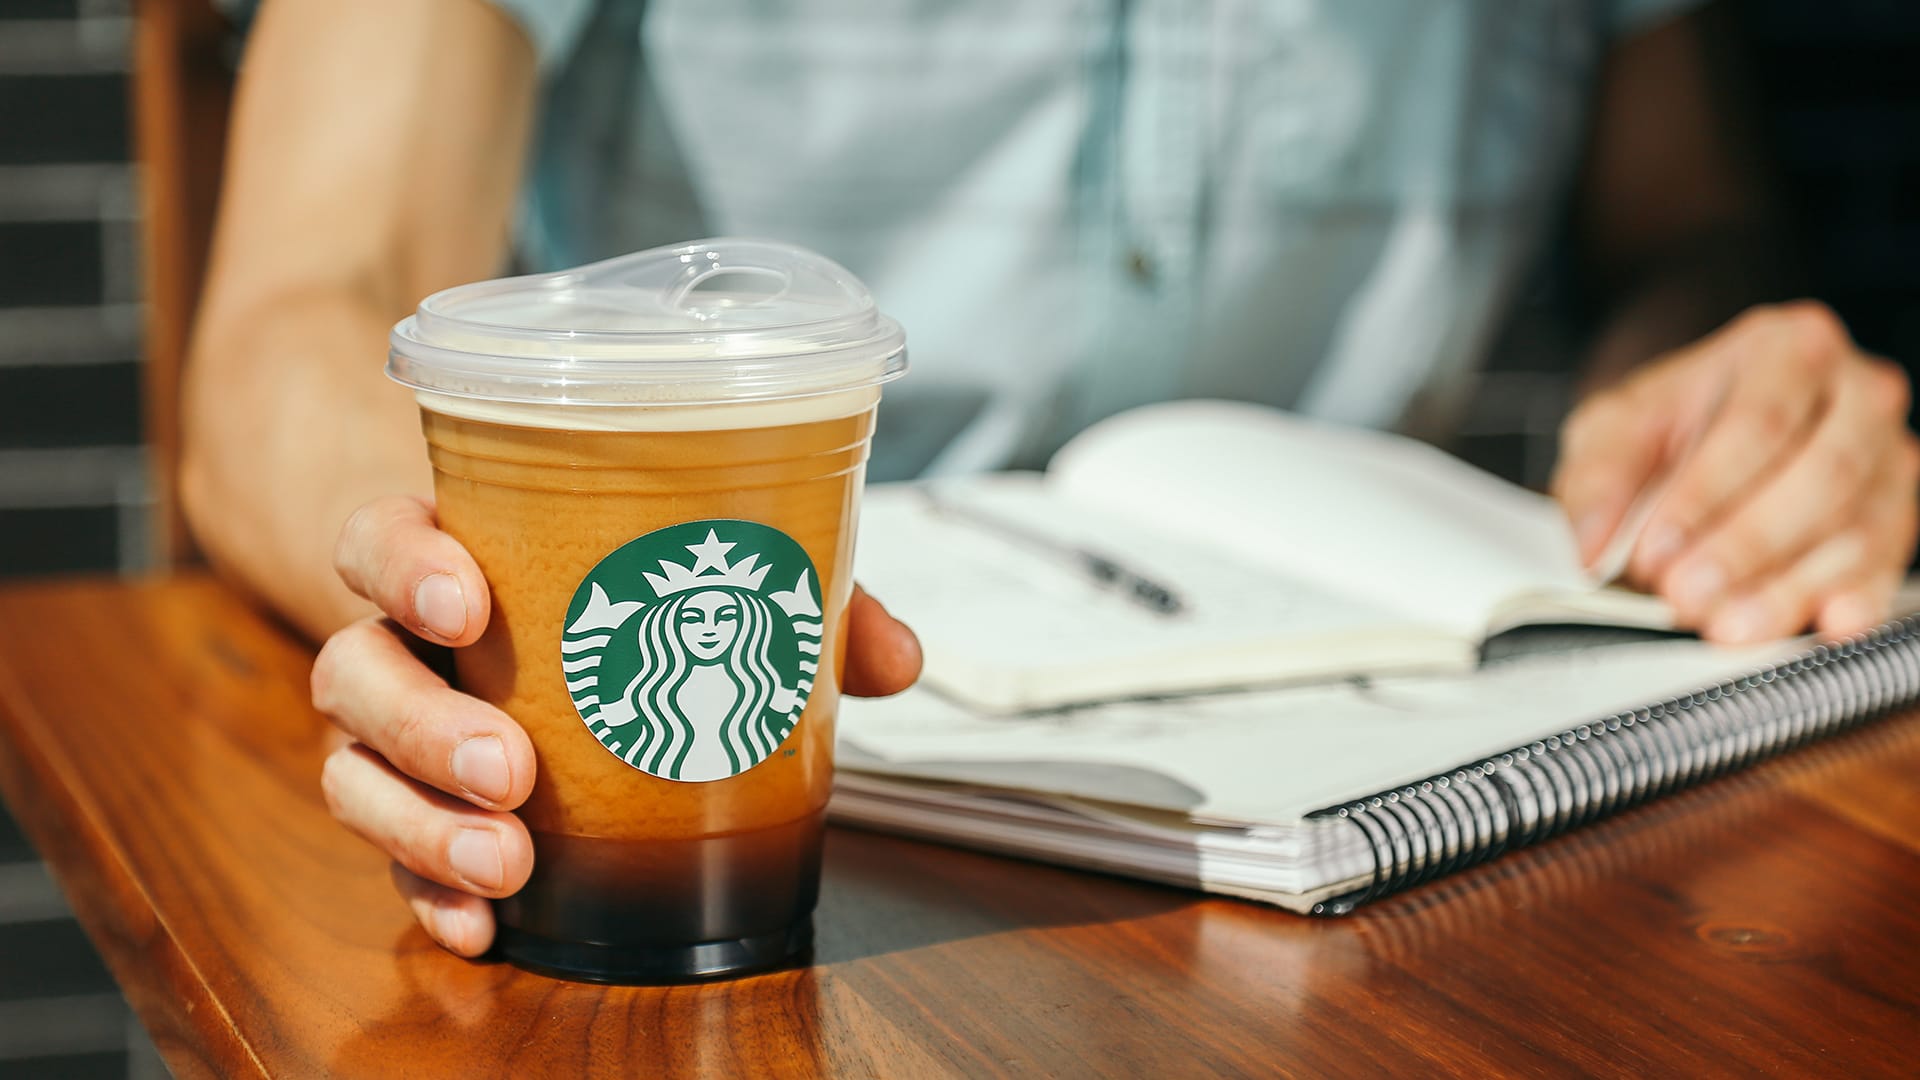 Why Starbucks’s plastic straw ban might not help the environment